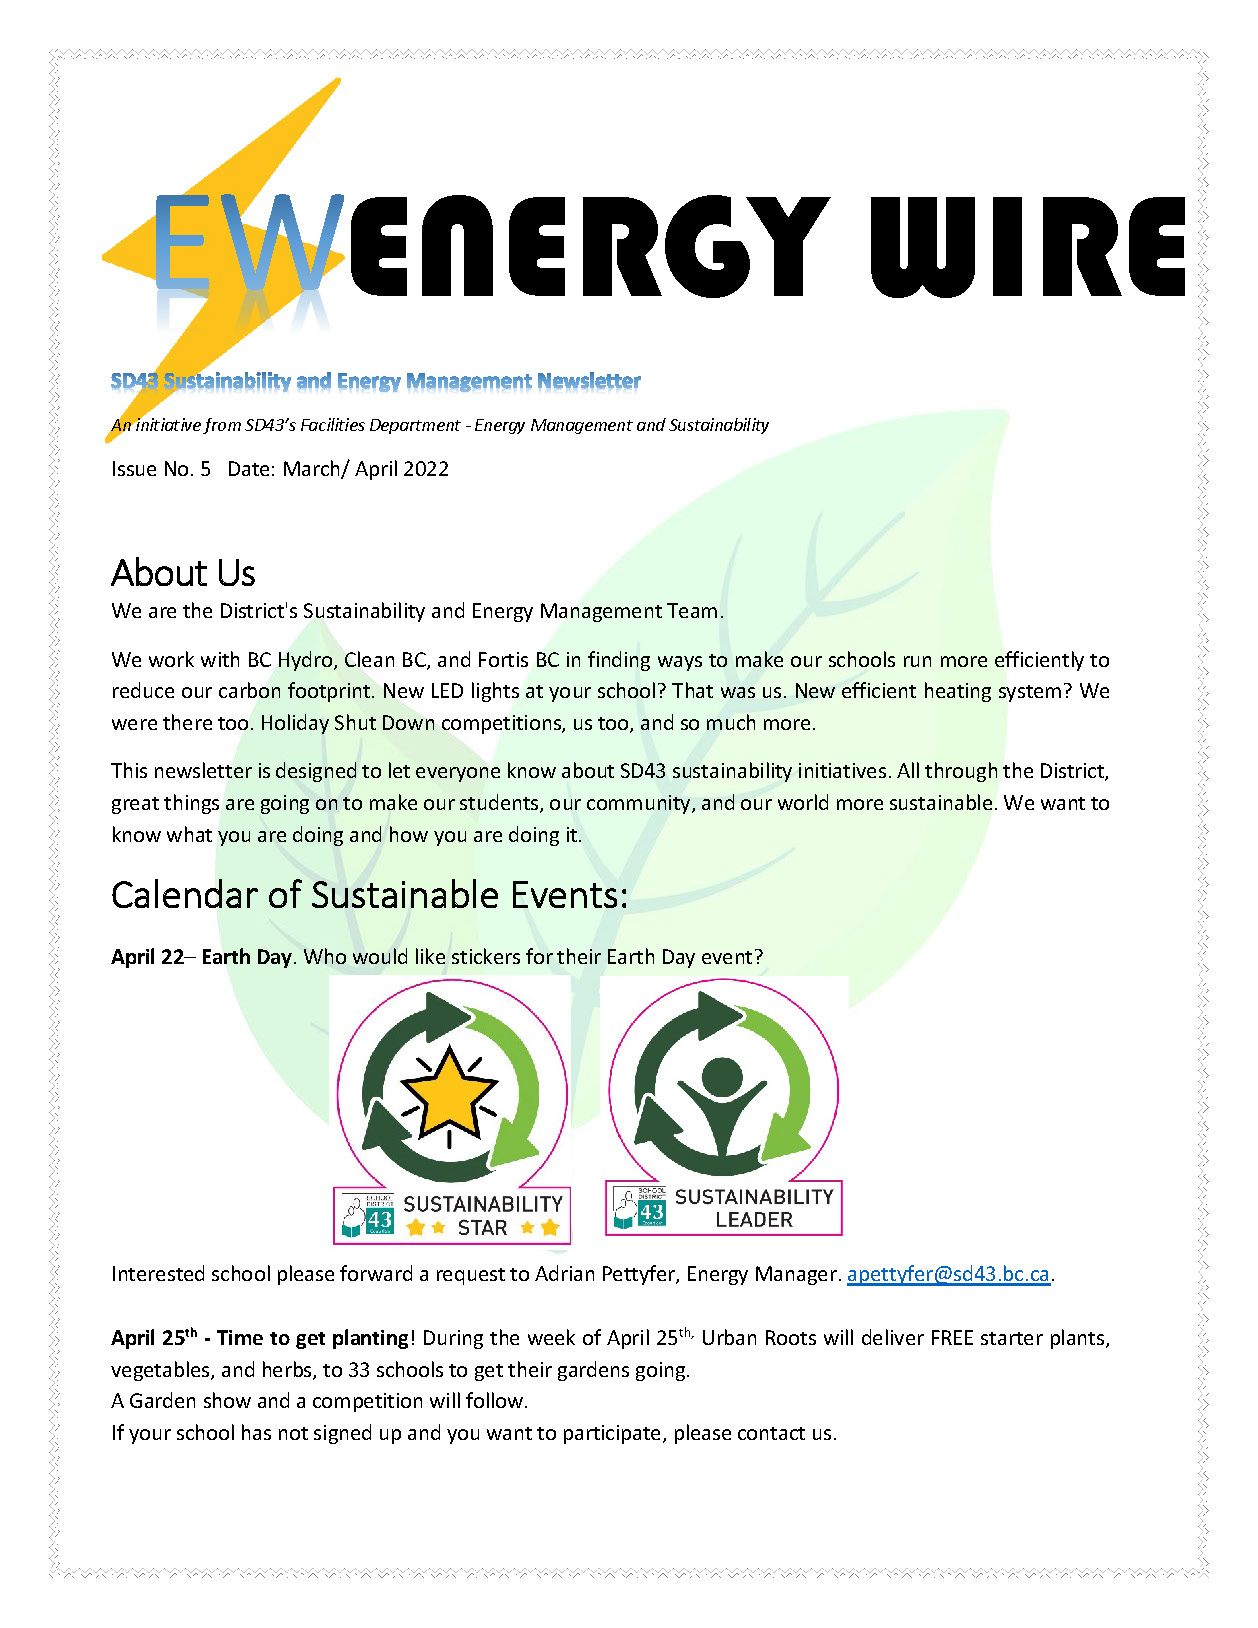 March April - Energy Wire Newsletter_Page_1.jpg